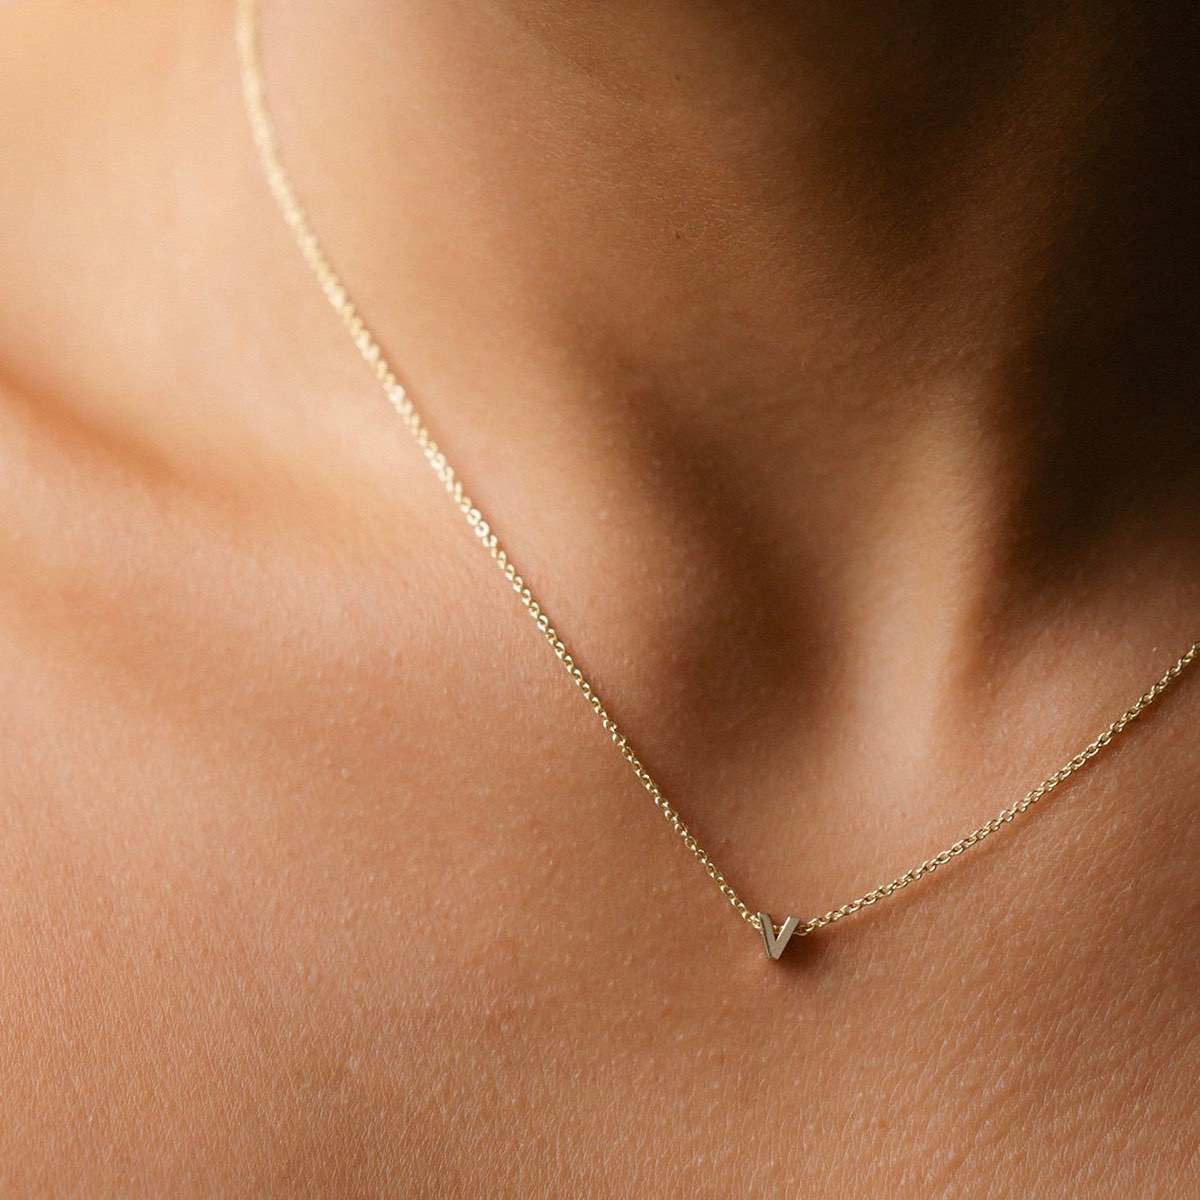 Hand finished solid gold letter necklace: Close up of a model wearing our beautiful 9ct yellow gold Tiny Letter V Charm Necklace with a 40cm cable chain